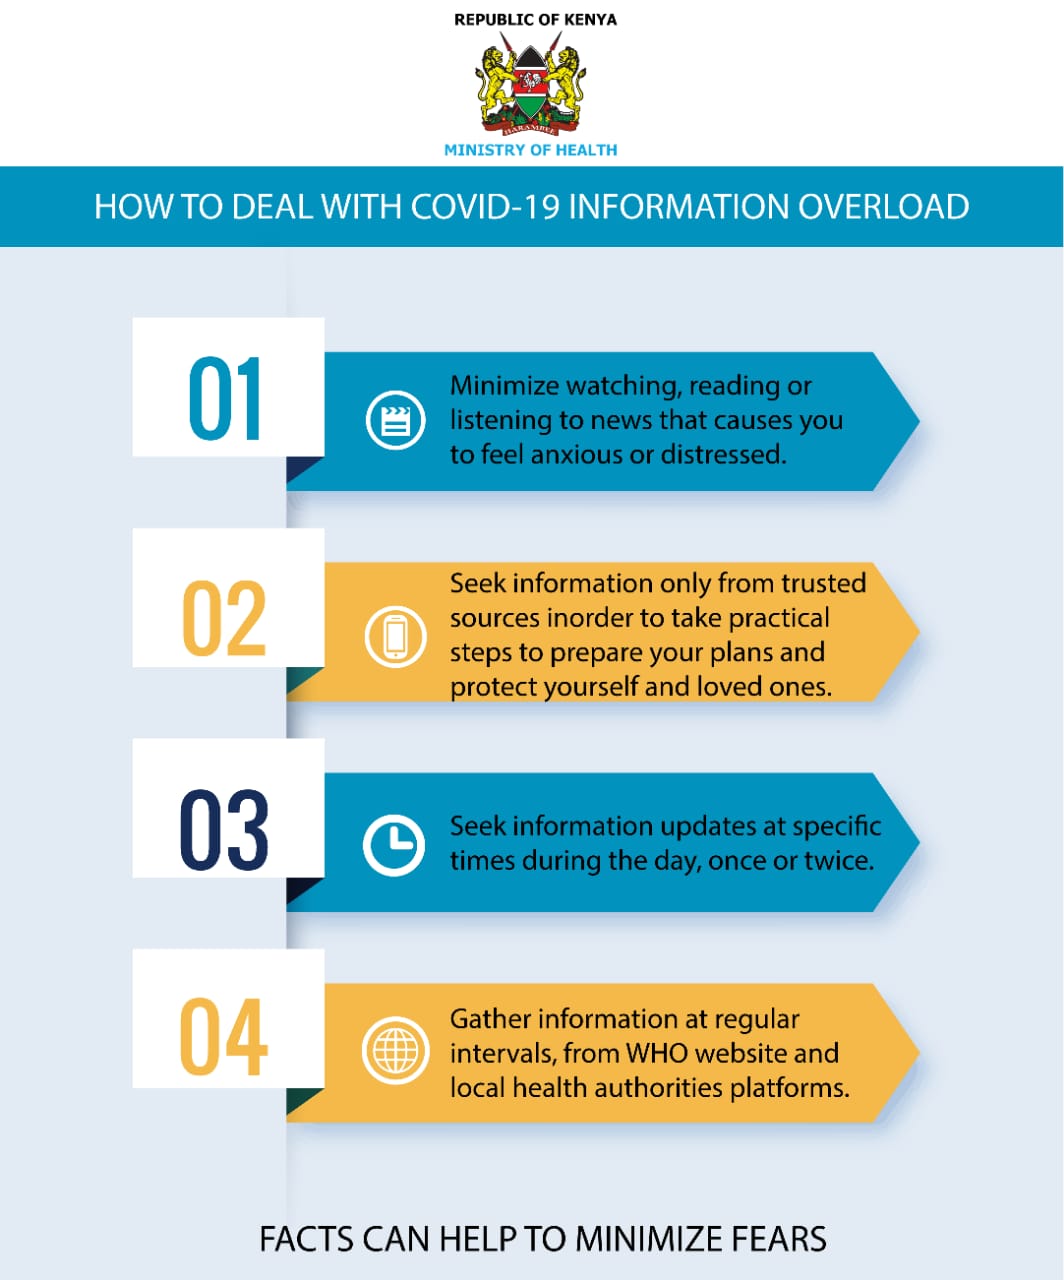 How to deal with COVID-19 Information overload